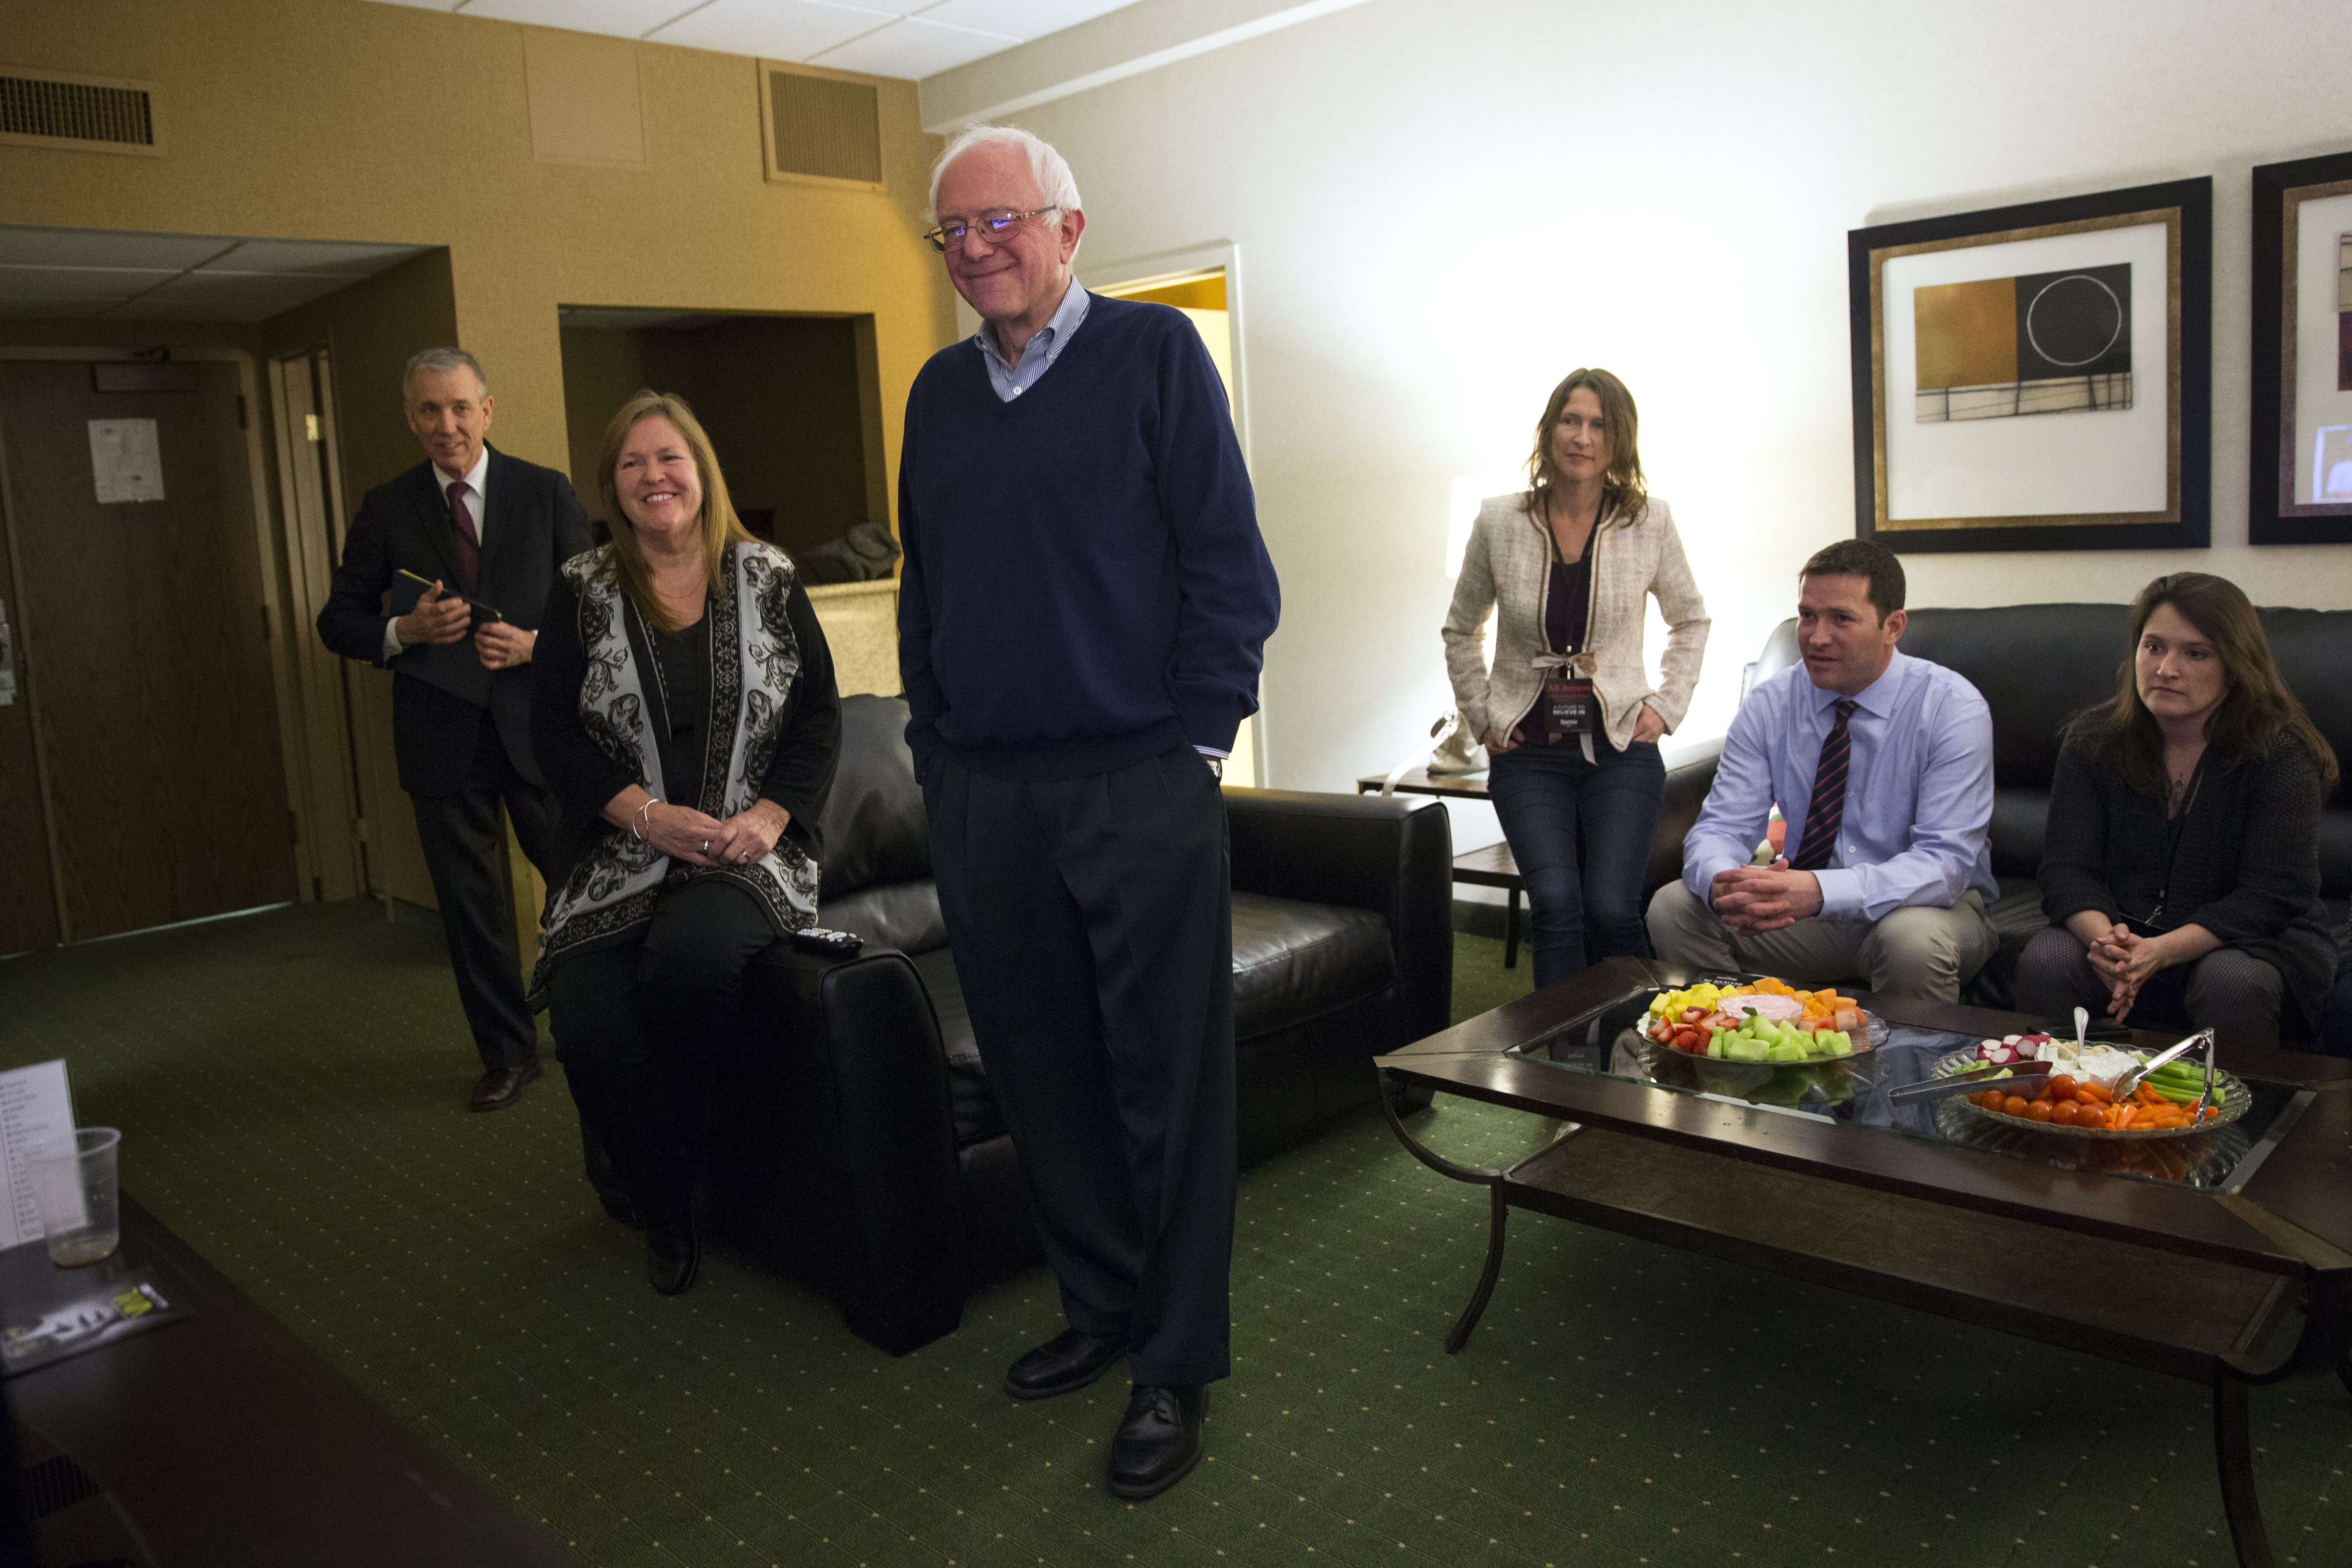 Democratic presidential candidate Sen. Bernie Sanders, I-Vt., watches caucus returns in his hotel room, on Feb. 1, 2016 in Des Moines, Iowa.